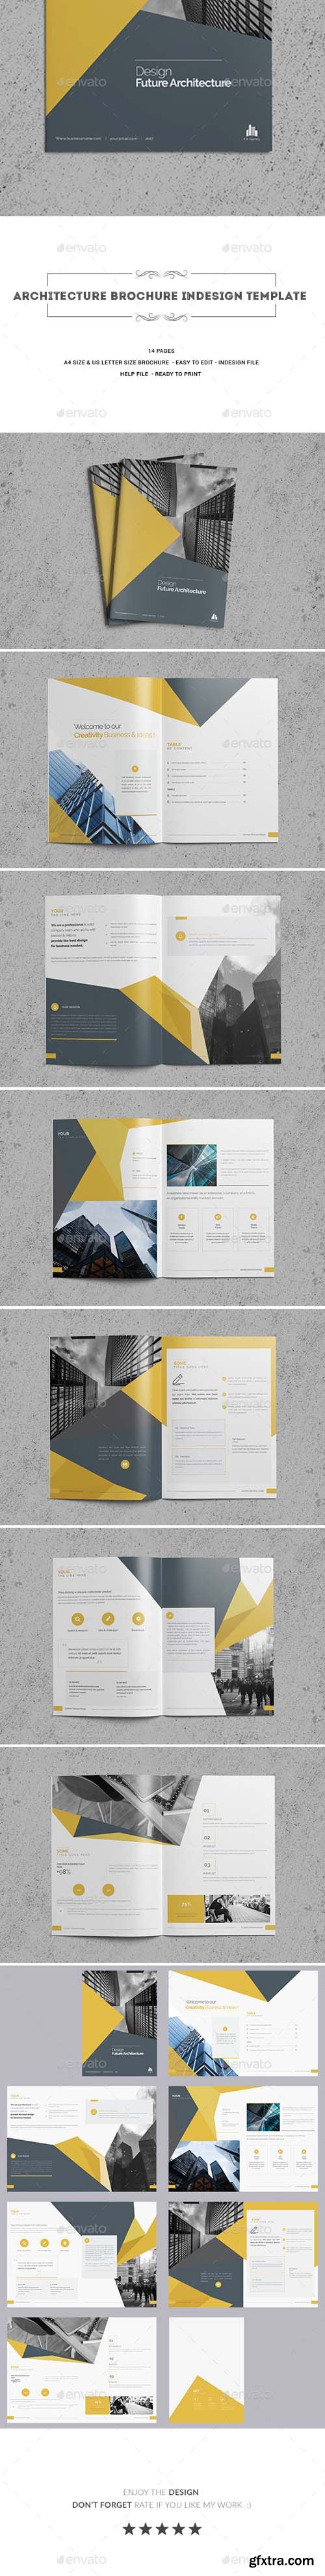 GR - Architecture Brochure Indesign Template 20094740